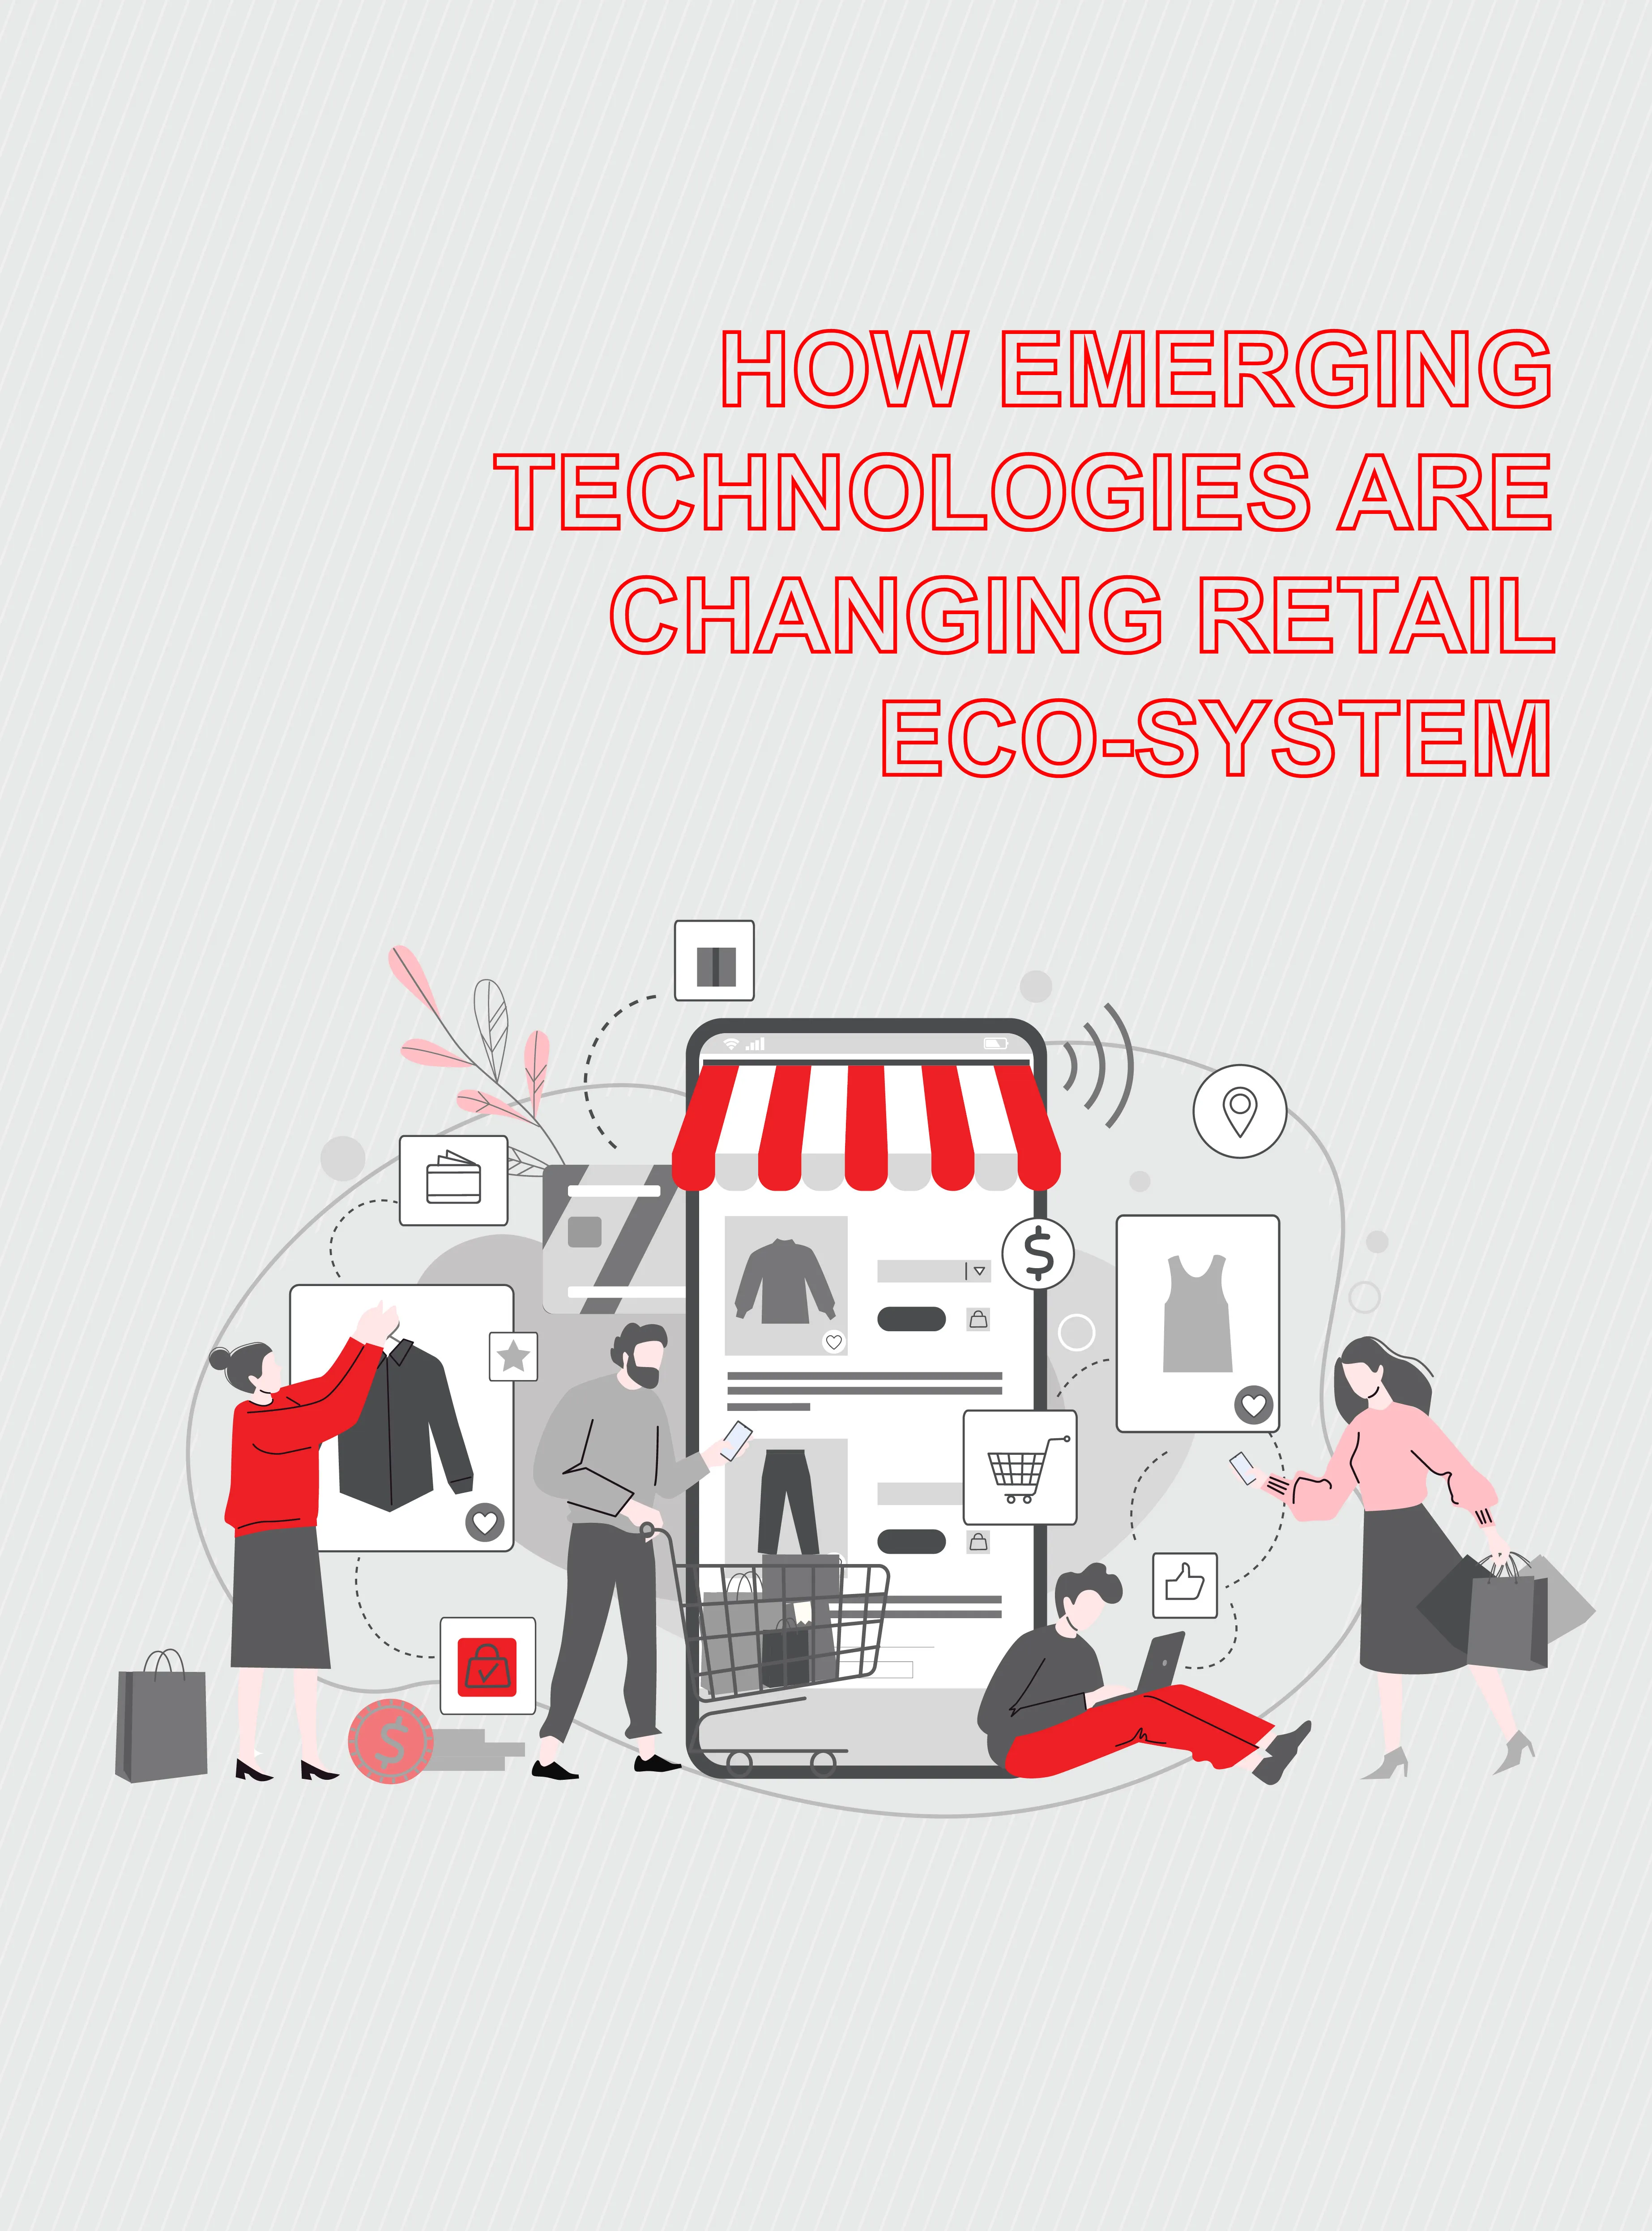 How emerging technologies are changing the retail ecosystem